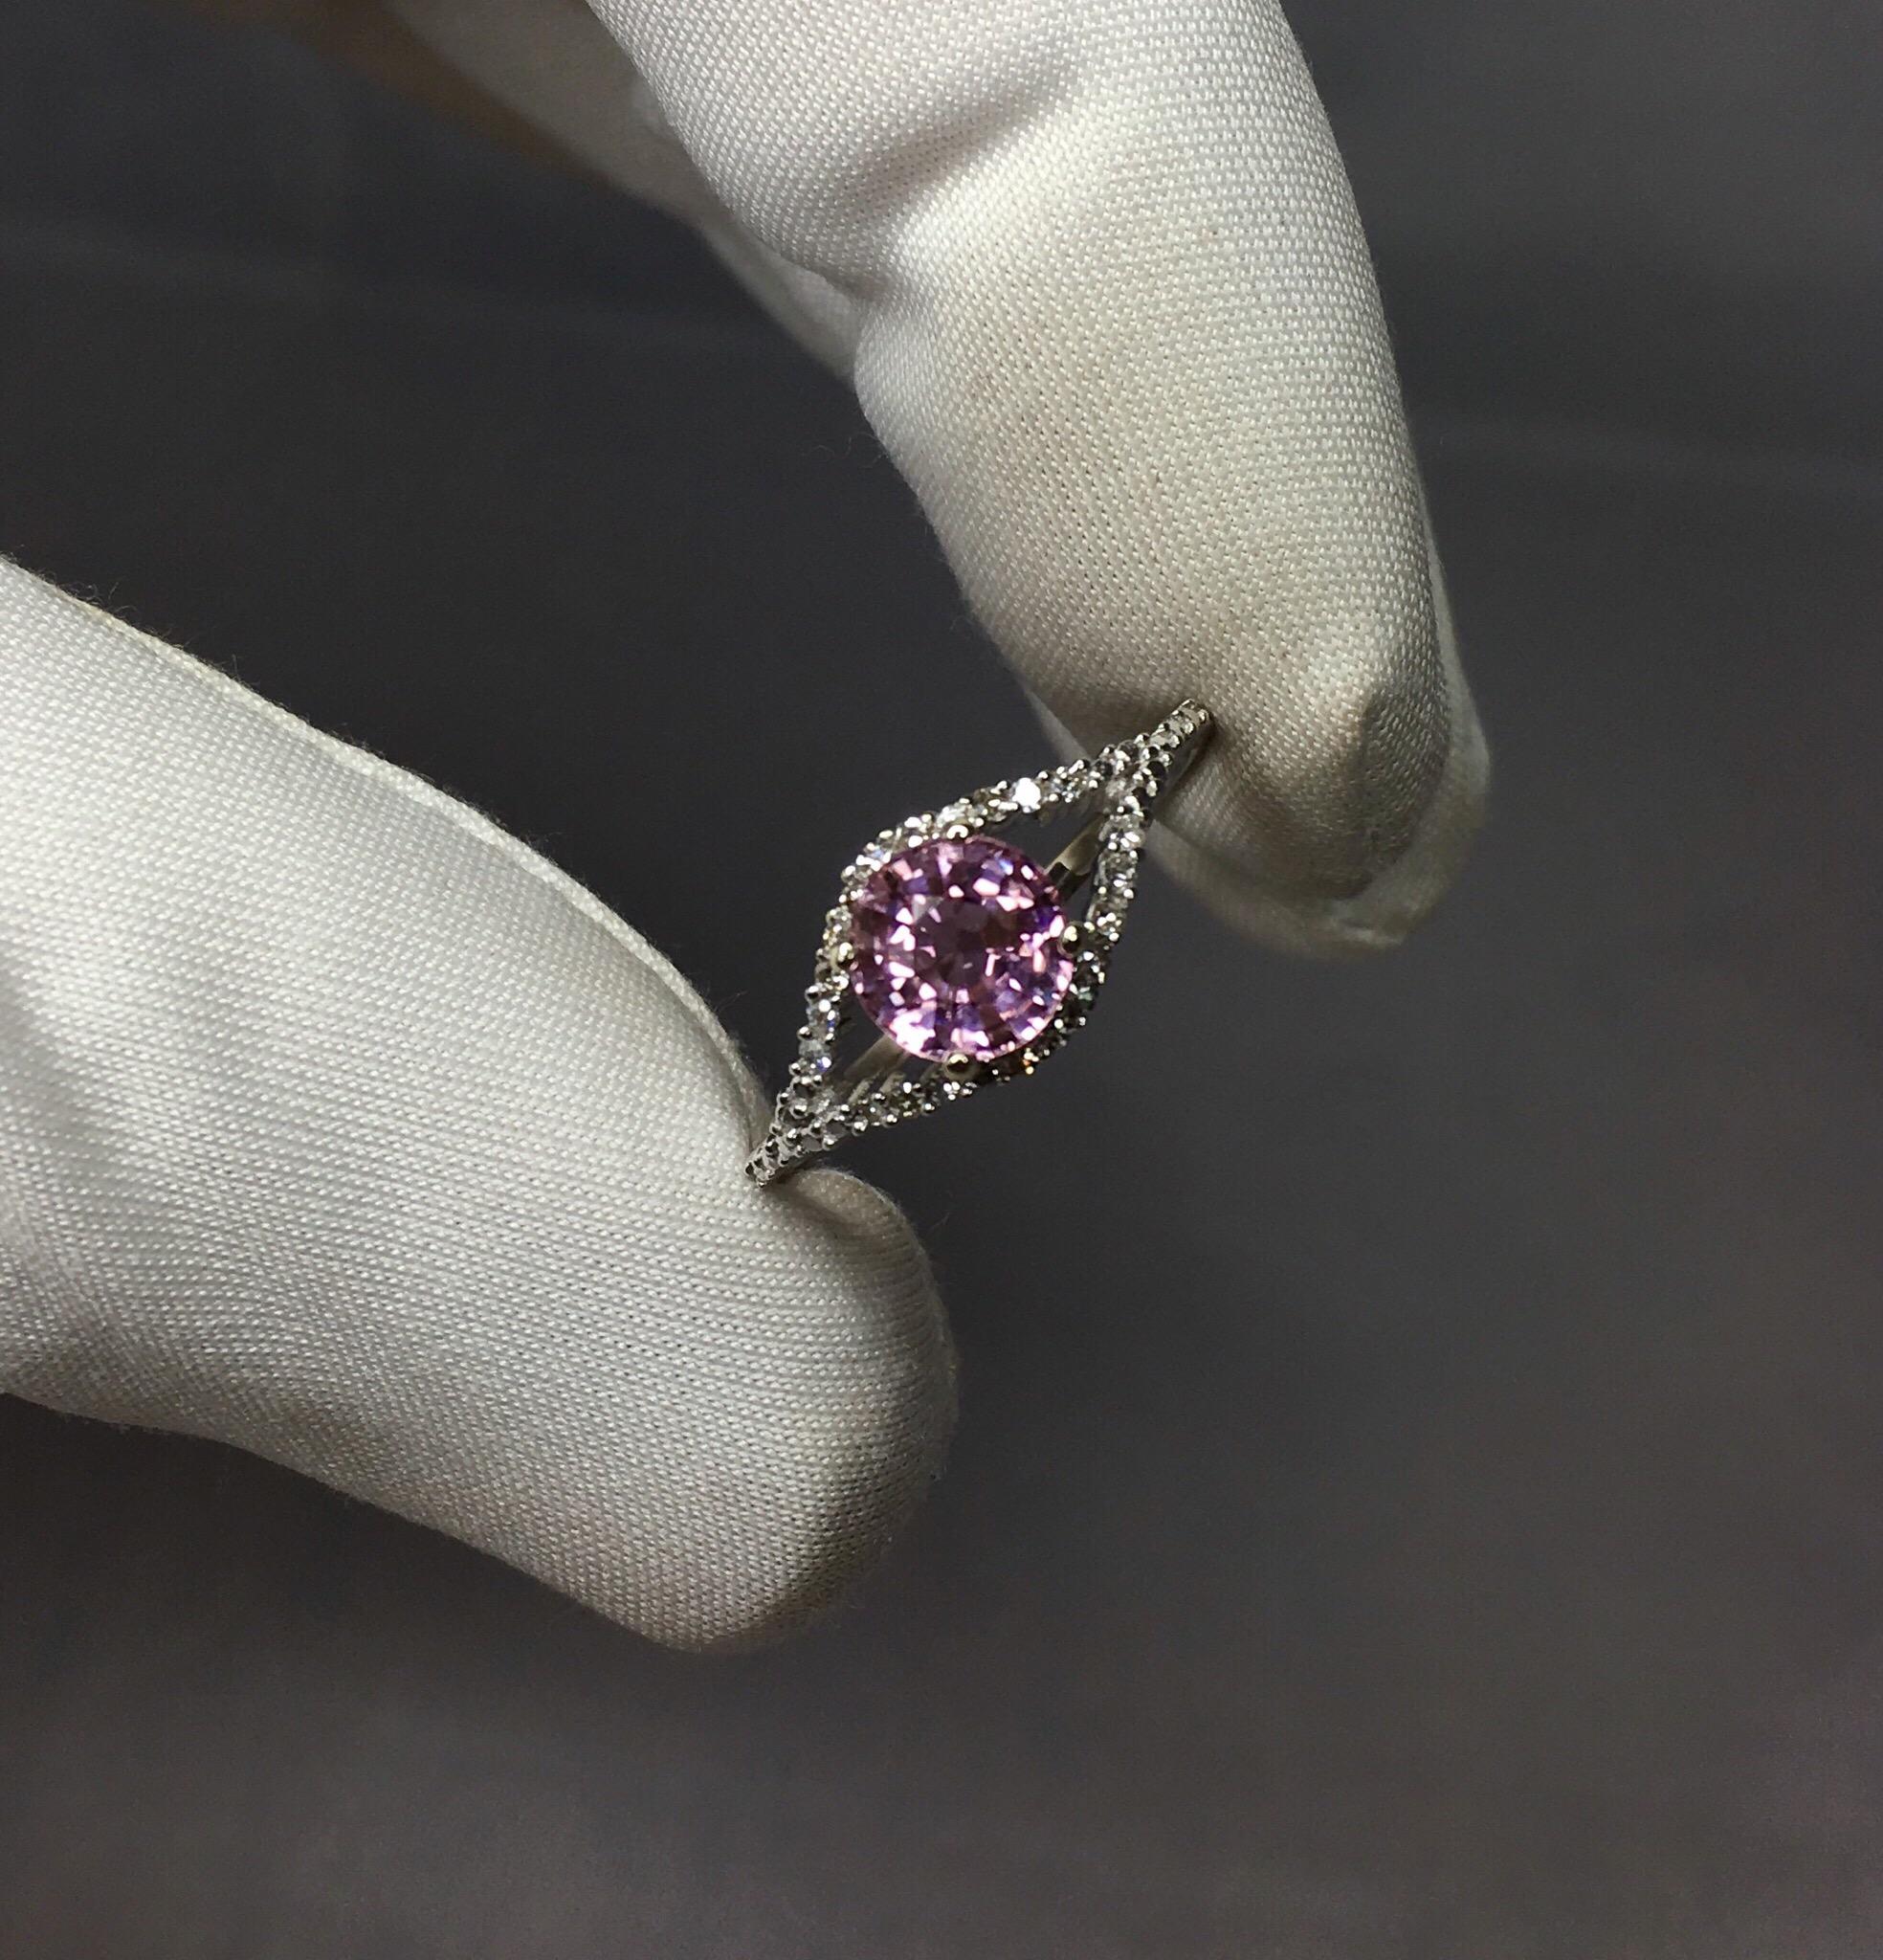 Stunning pink tourmaline set in a fine diamond studded 9k white gold ring setting.

0.90 carat tourmaline with a beautiful colour and excellent clarity. Very clean stone with only small inclusions visible when looking closely. Surrounded by 22